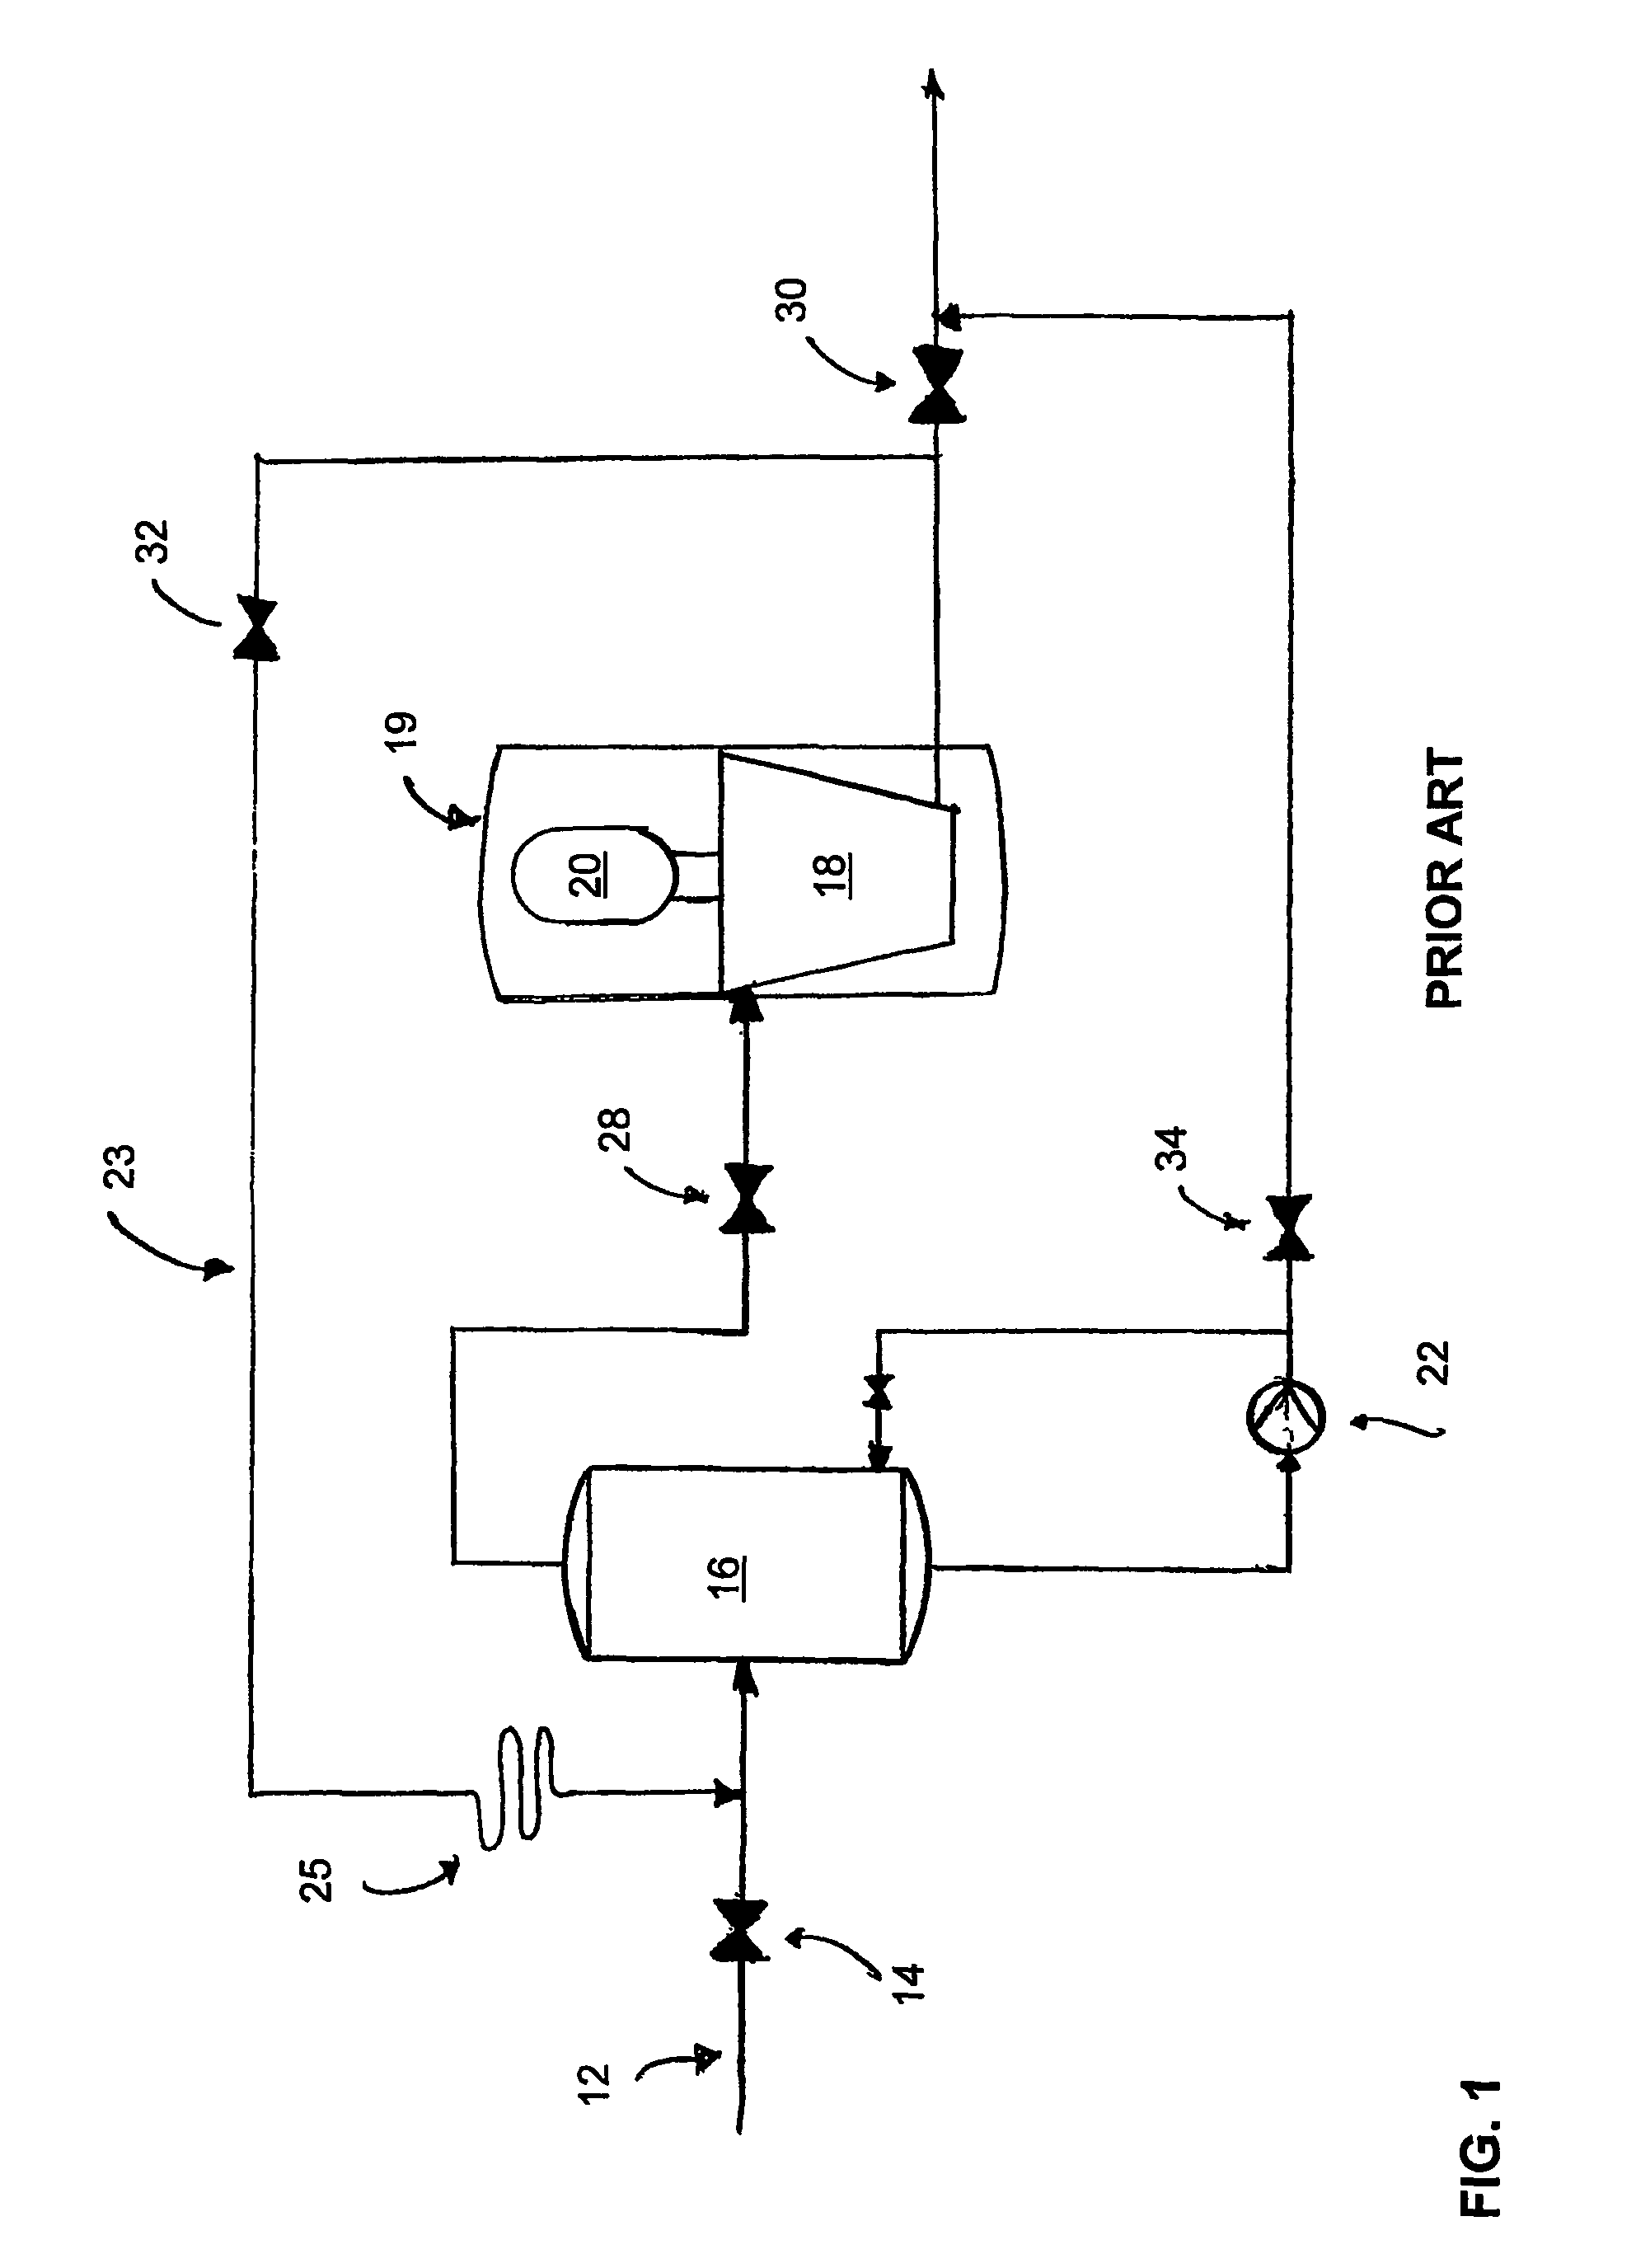 Subsea compression system and method